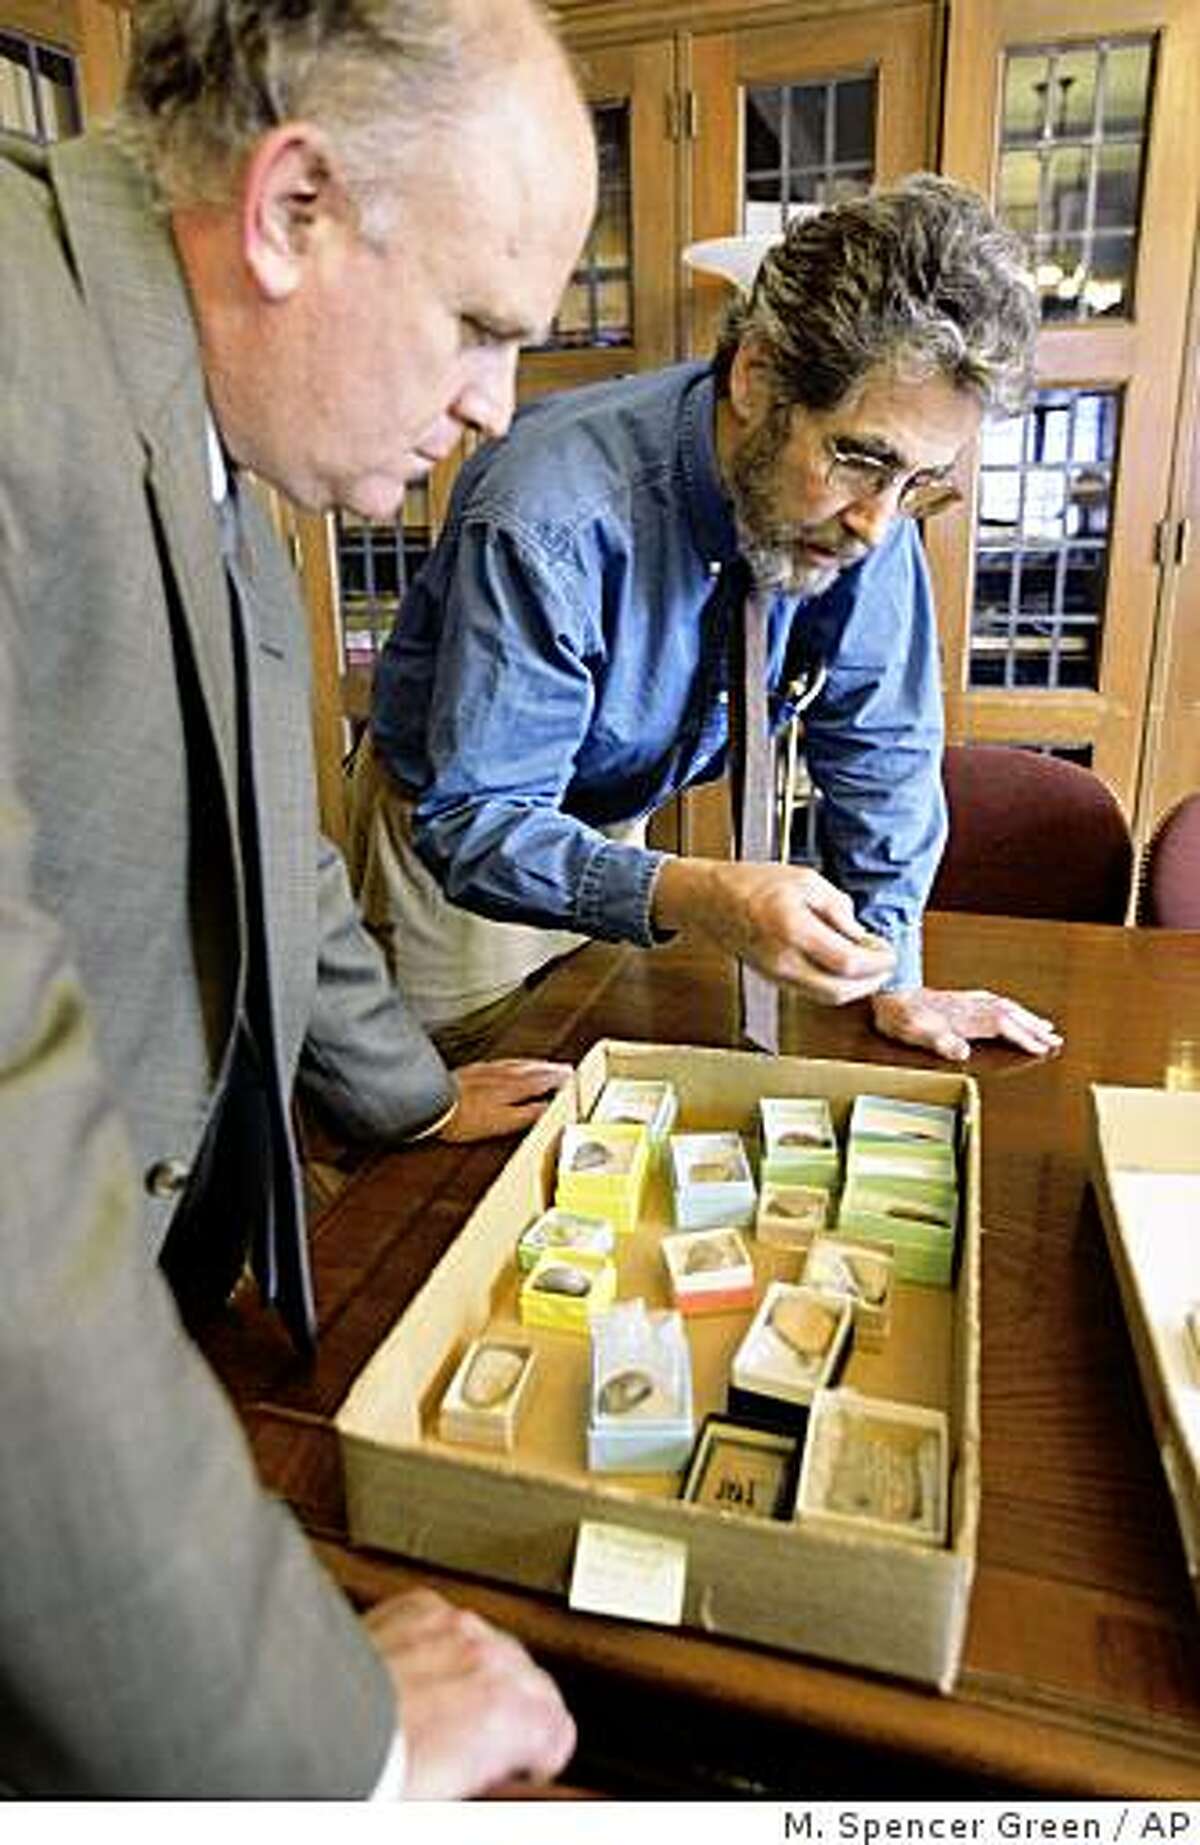 **ADVANCE FOR SUNDAY, FEB. 22** Gil Stein, director of the University of Chicago's Oriental Institute, left, and Matt Stolper, director of the Persepolis Fortification Archive, look over a selection of Aramaic tablets Oct. 16, 2008. The tablets are the subject of an unusual lawsuit. Victims of a terrorist bombing in Israel in 1997 won a multimillion judgment against Iran and are now trying to collect by seizing the tablets and selling them. (AP Photo/M. Spencer Green)